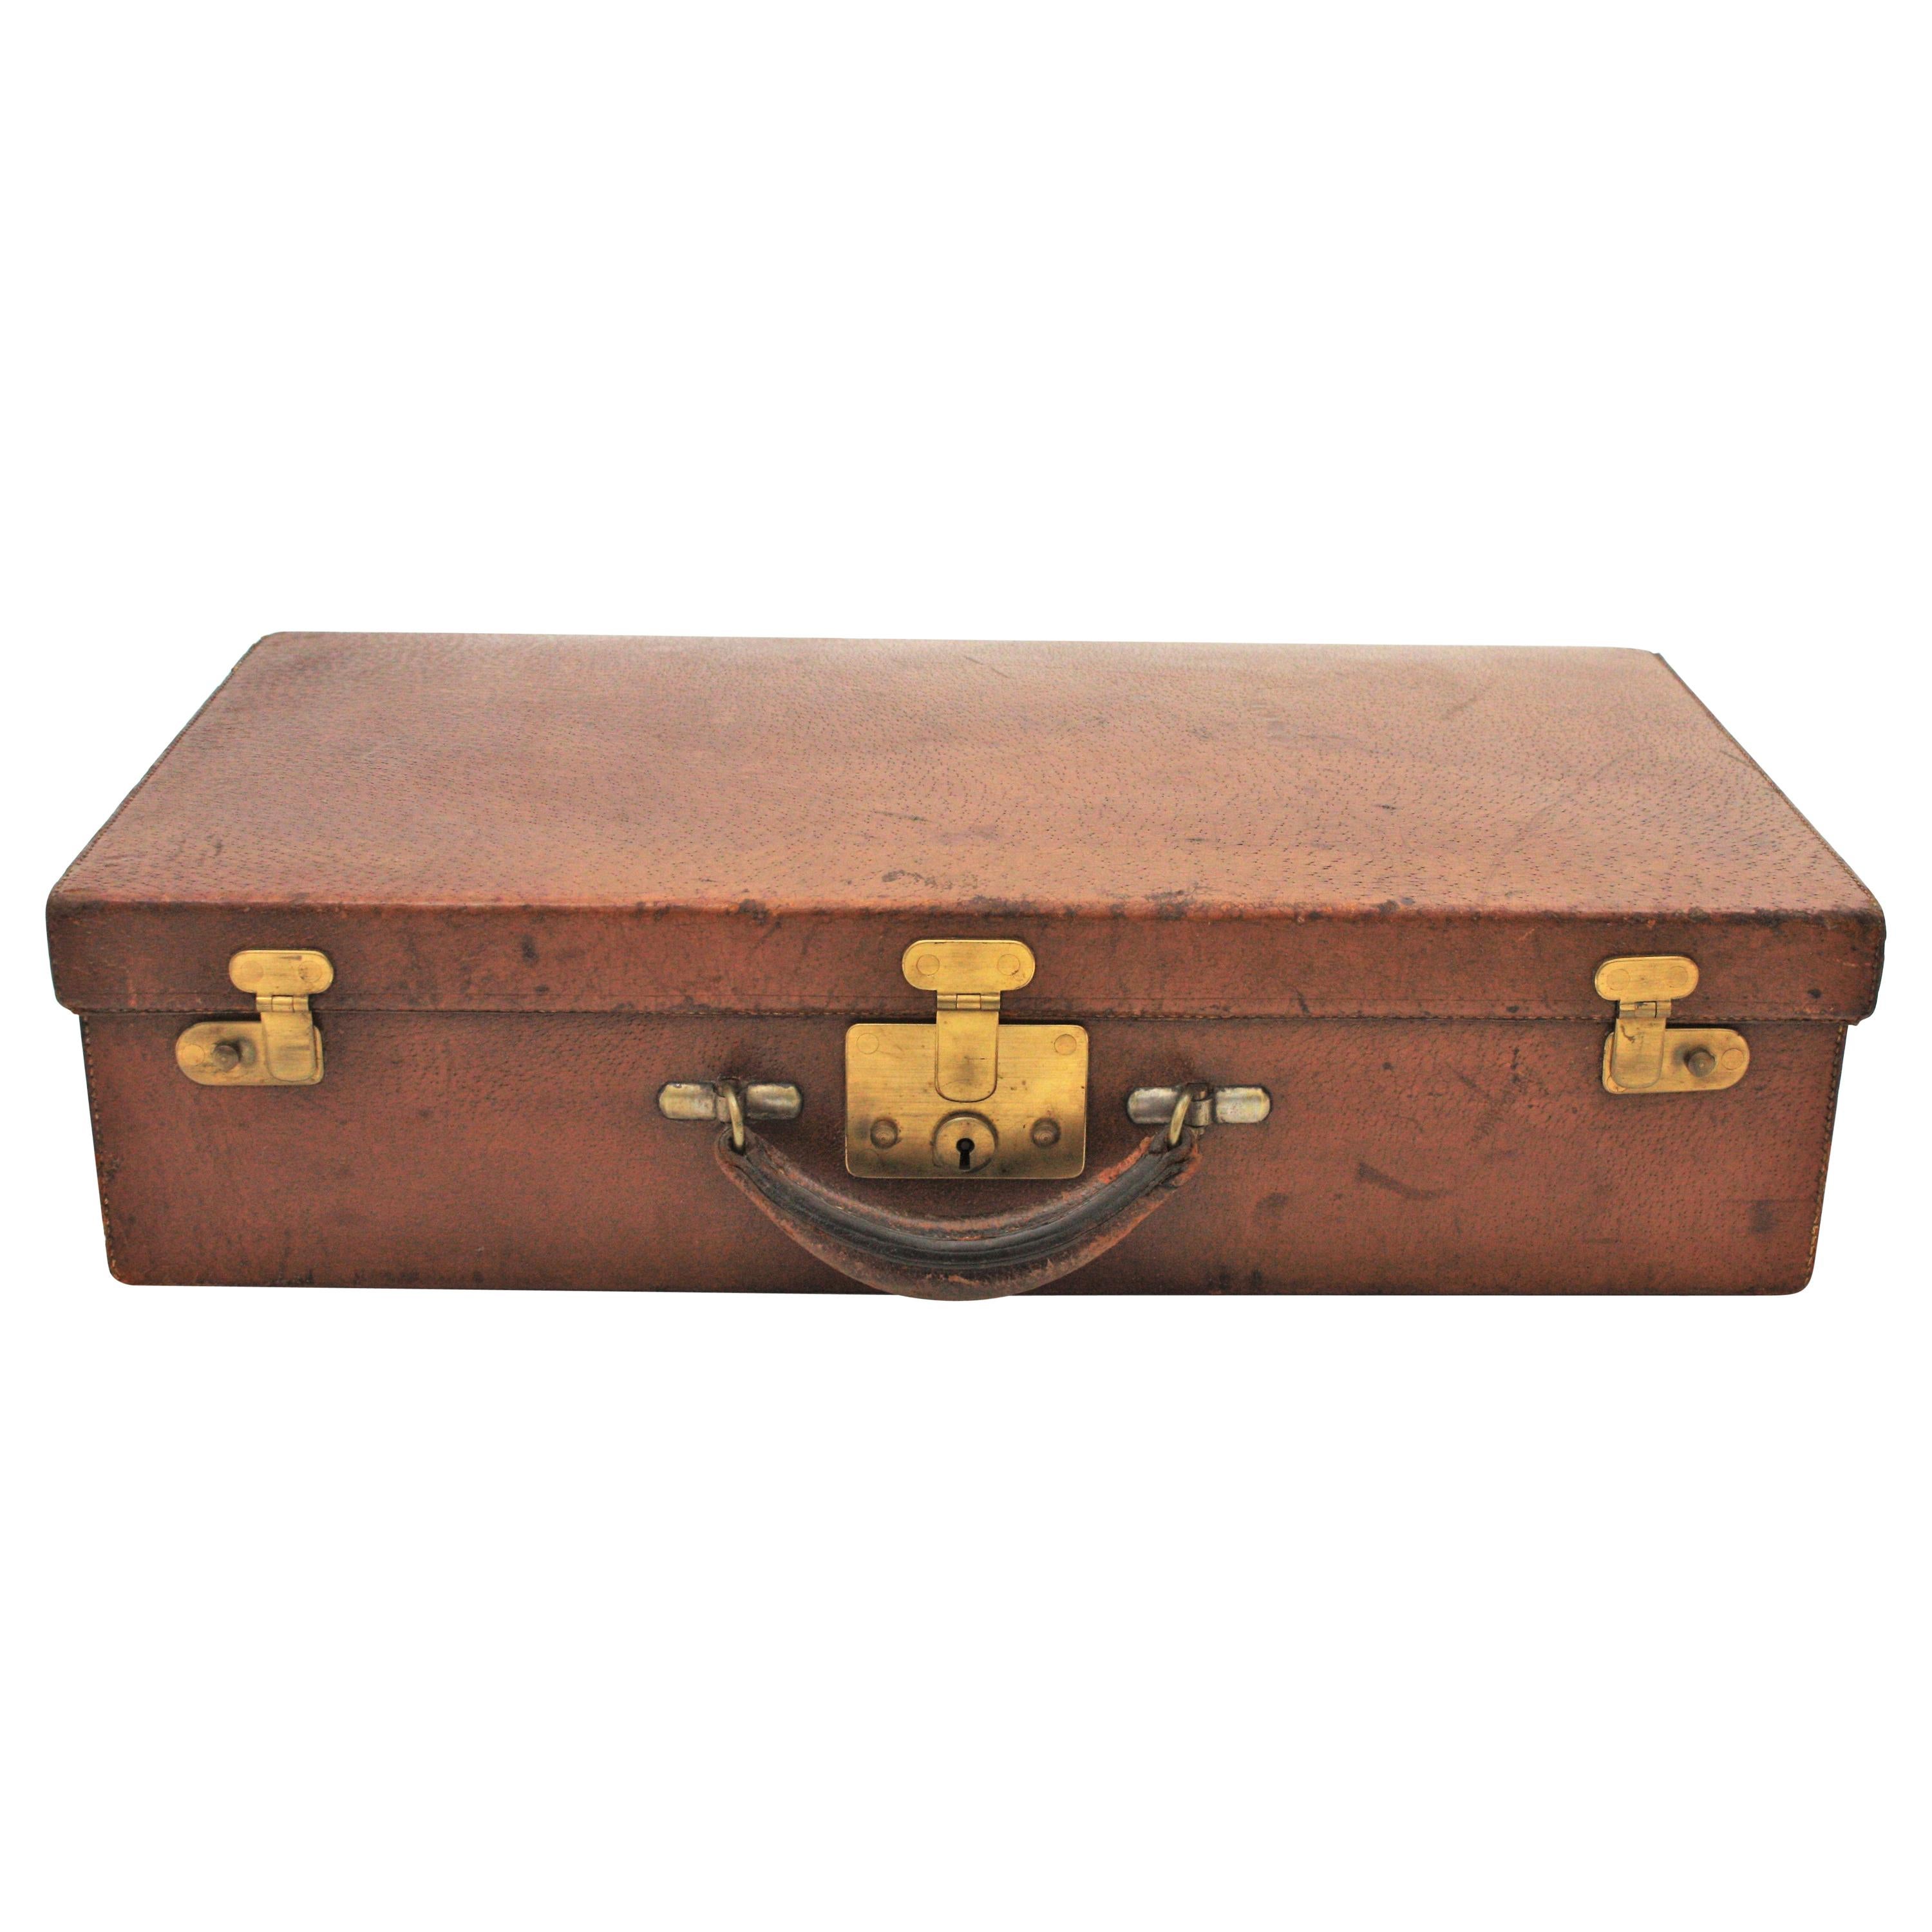 An exquisite Art Deco period luxury brown leather gentleman's suitcase. Manufactured by Gustave Keller (Keller Frères), 1920s-1930s.
Signed 'Gustave Keller. Av. Matignon 18, Paris' at the front part.
Rare find.
This outstanding top quality leather